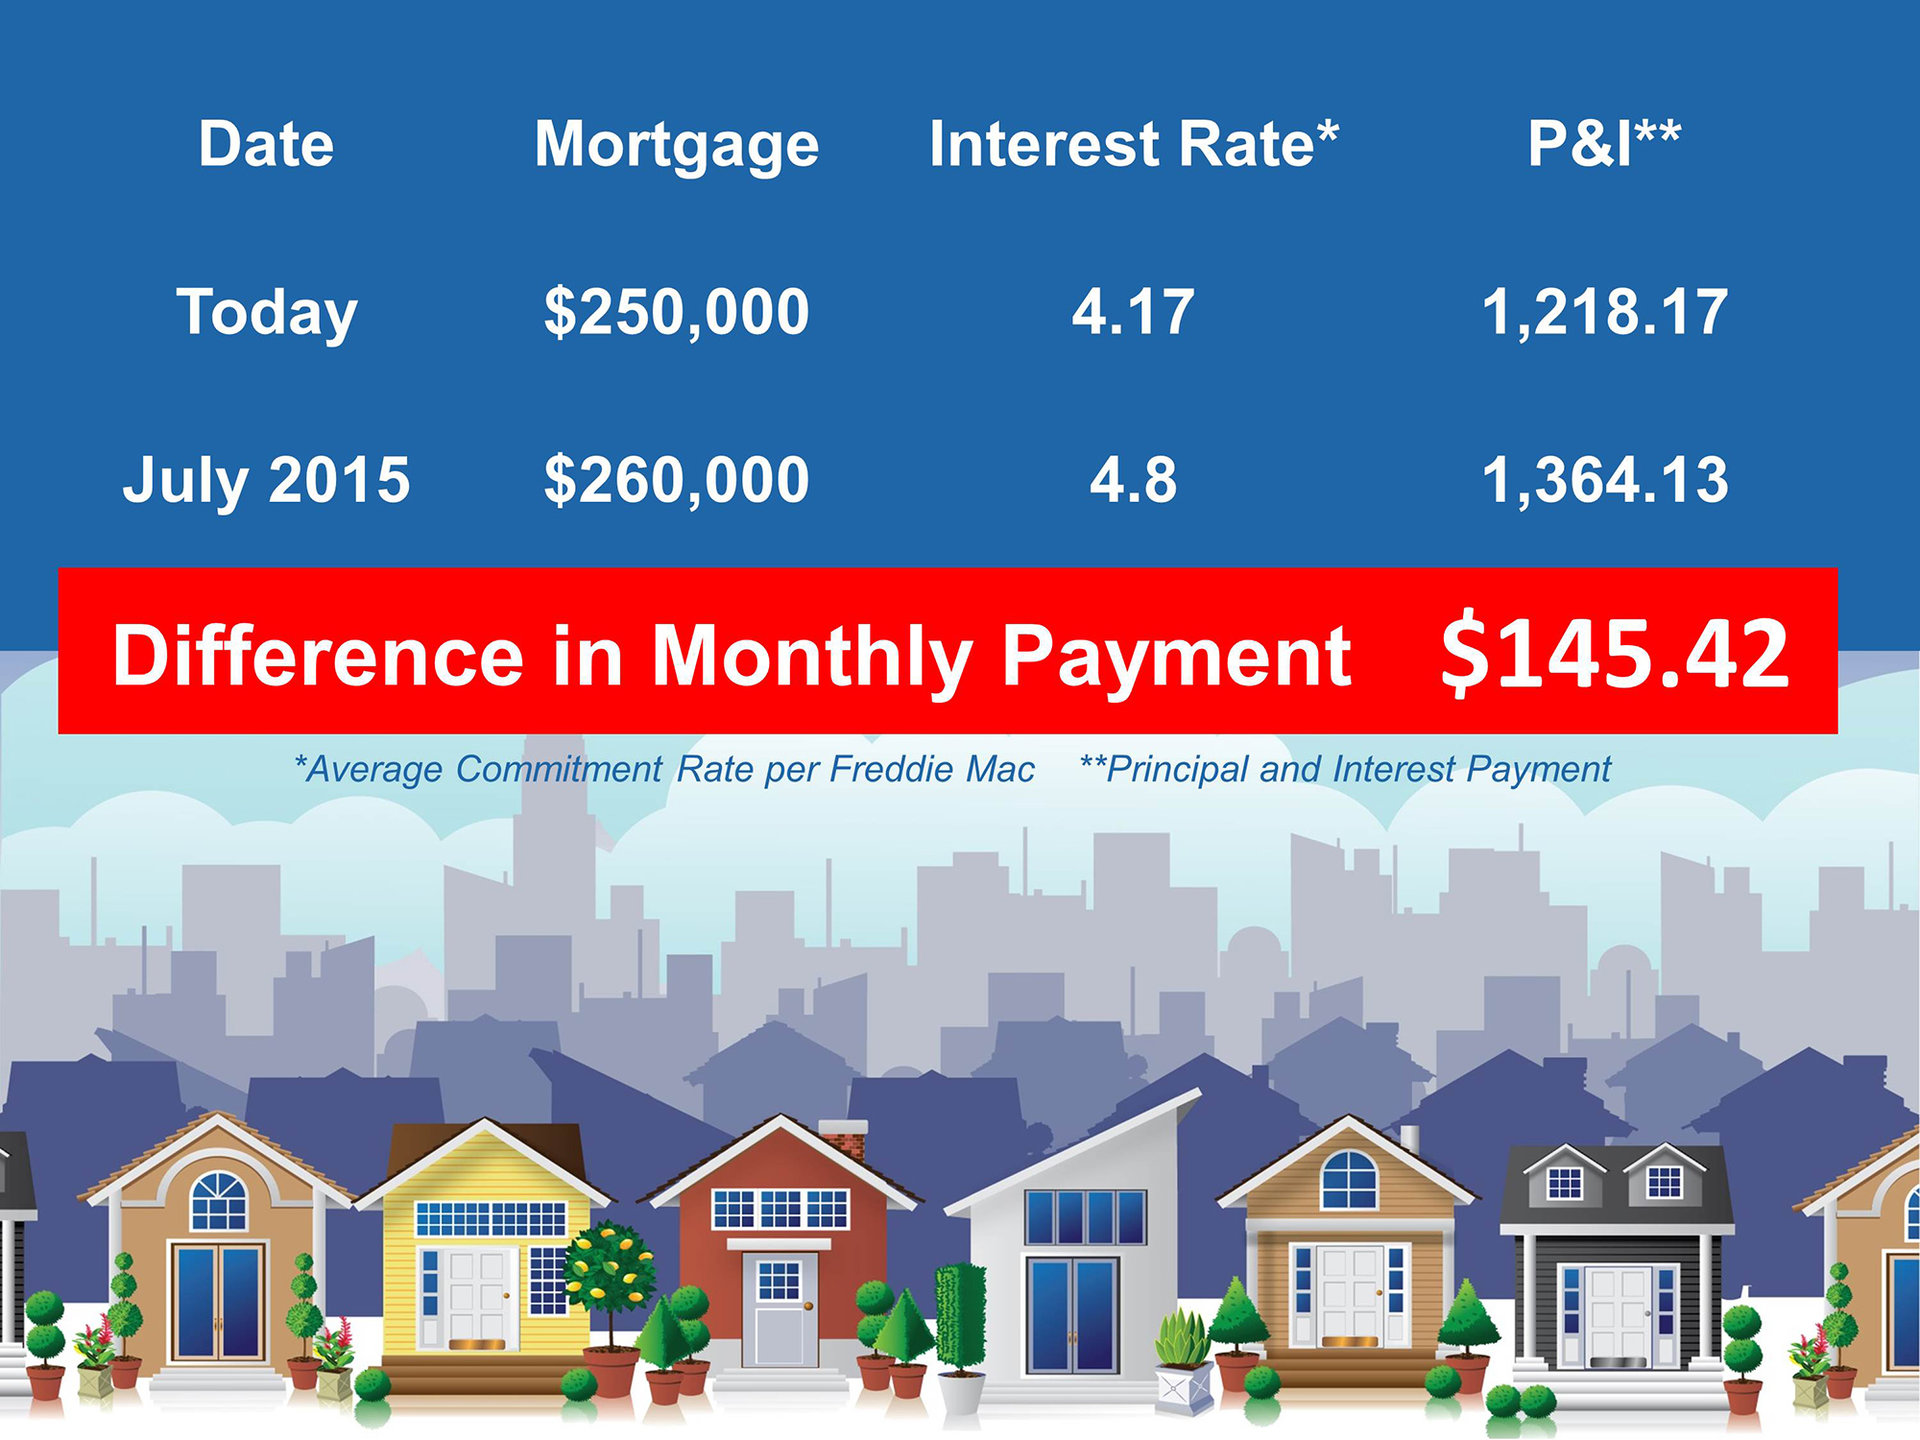 First Time Homebuyer's Cost of Waiting | Keeping Current Matters